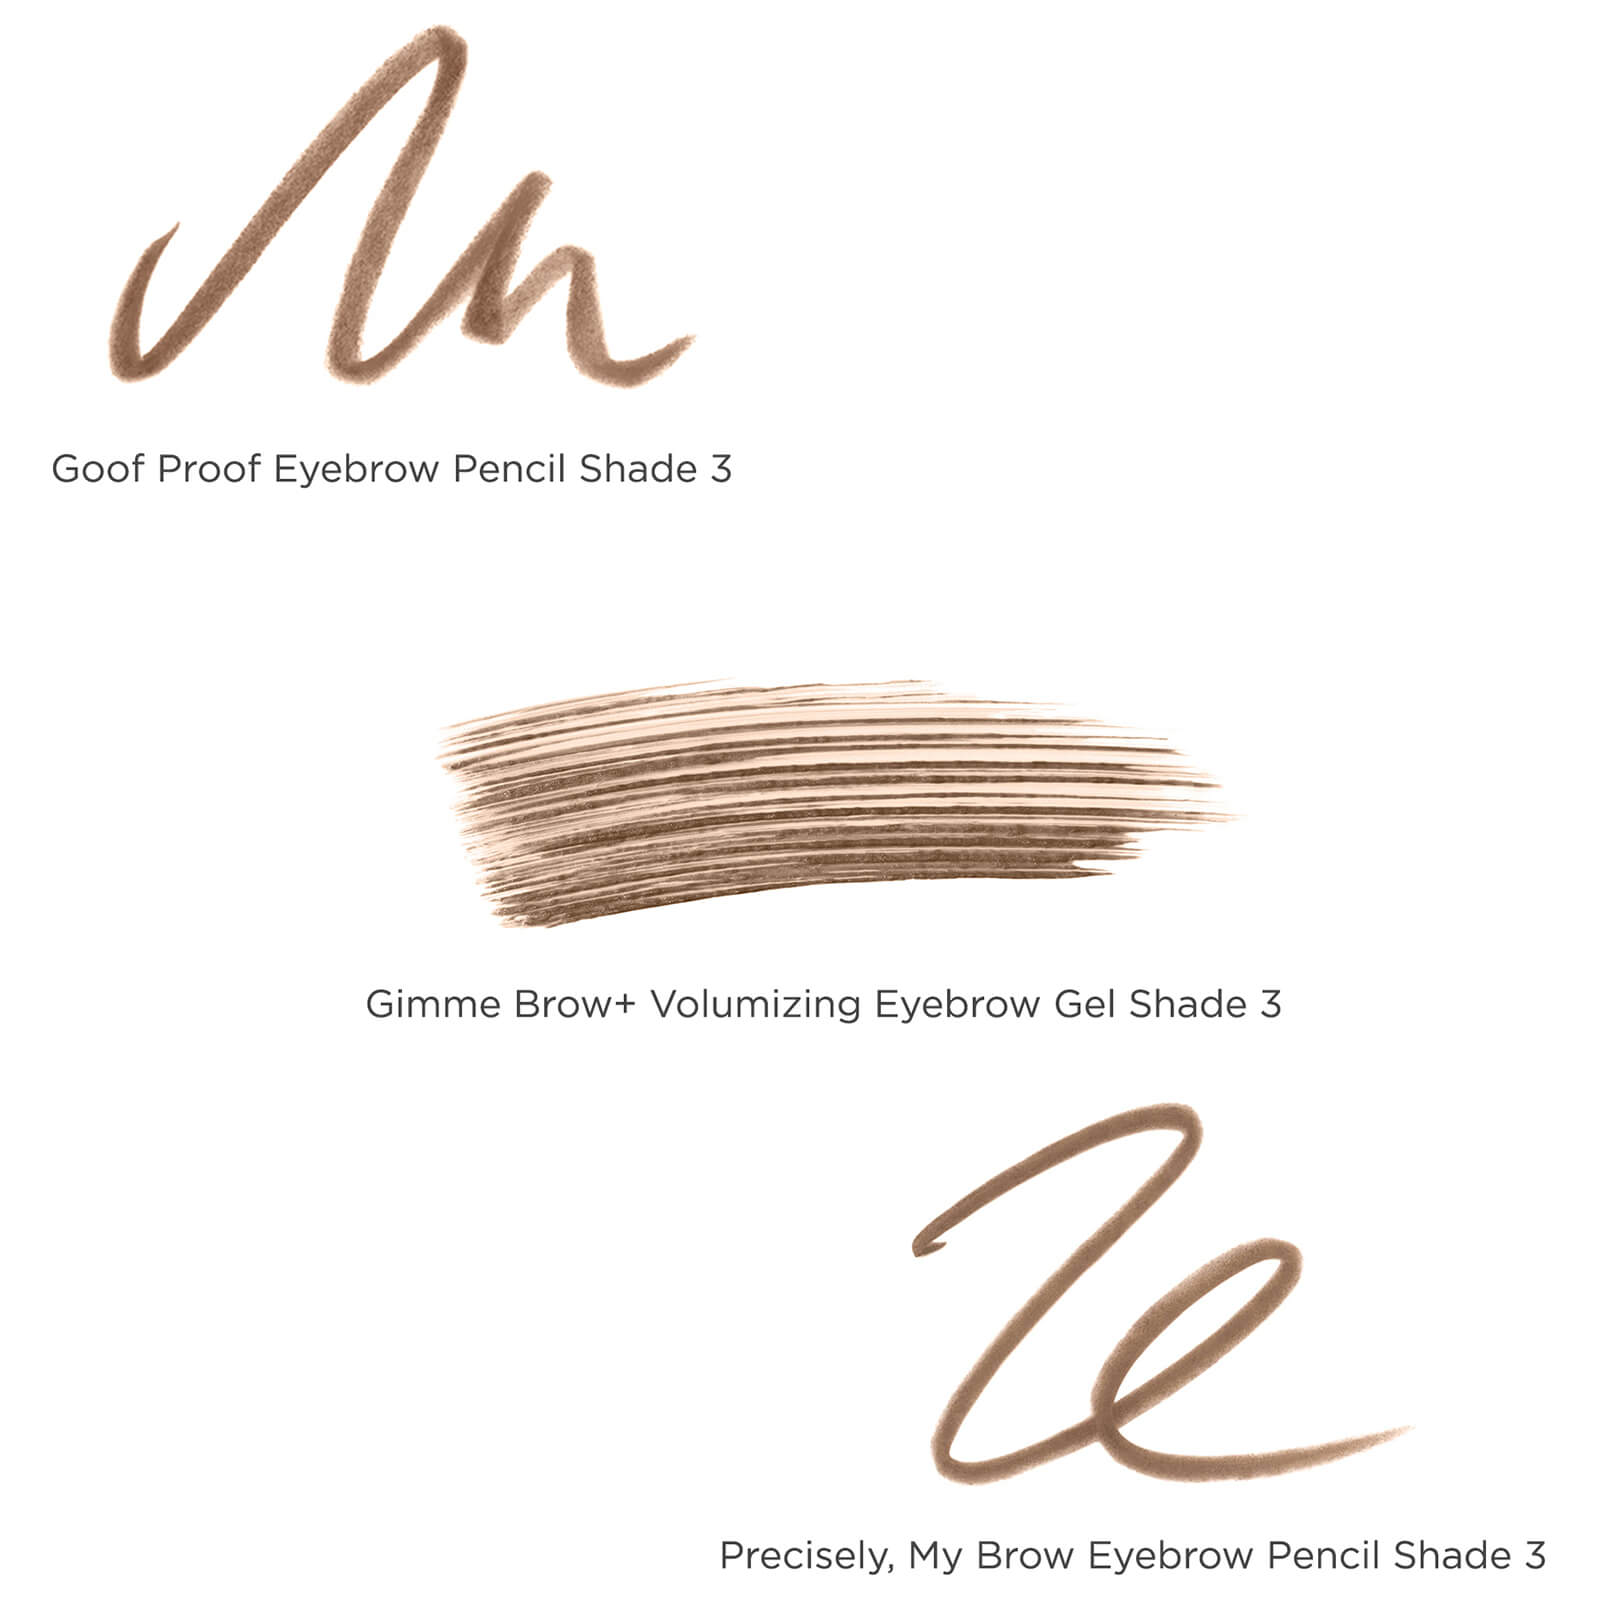 Brow Gel & Pencils Collection swatches